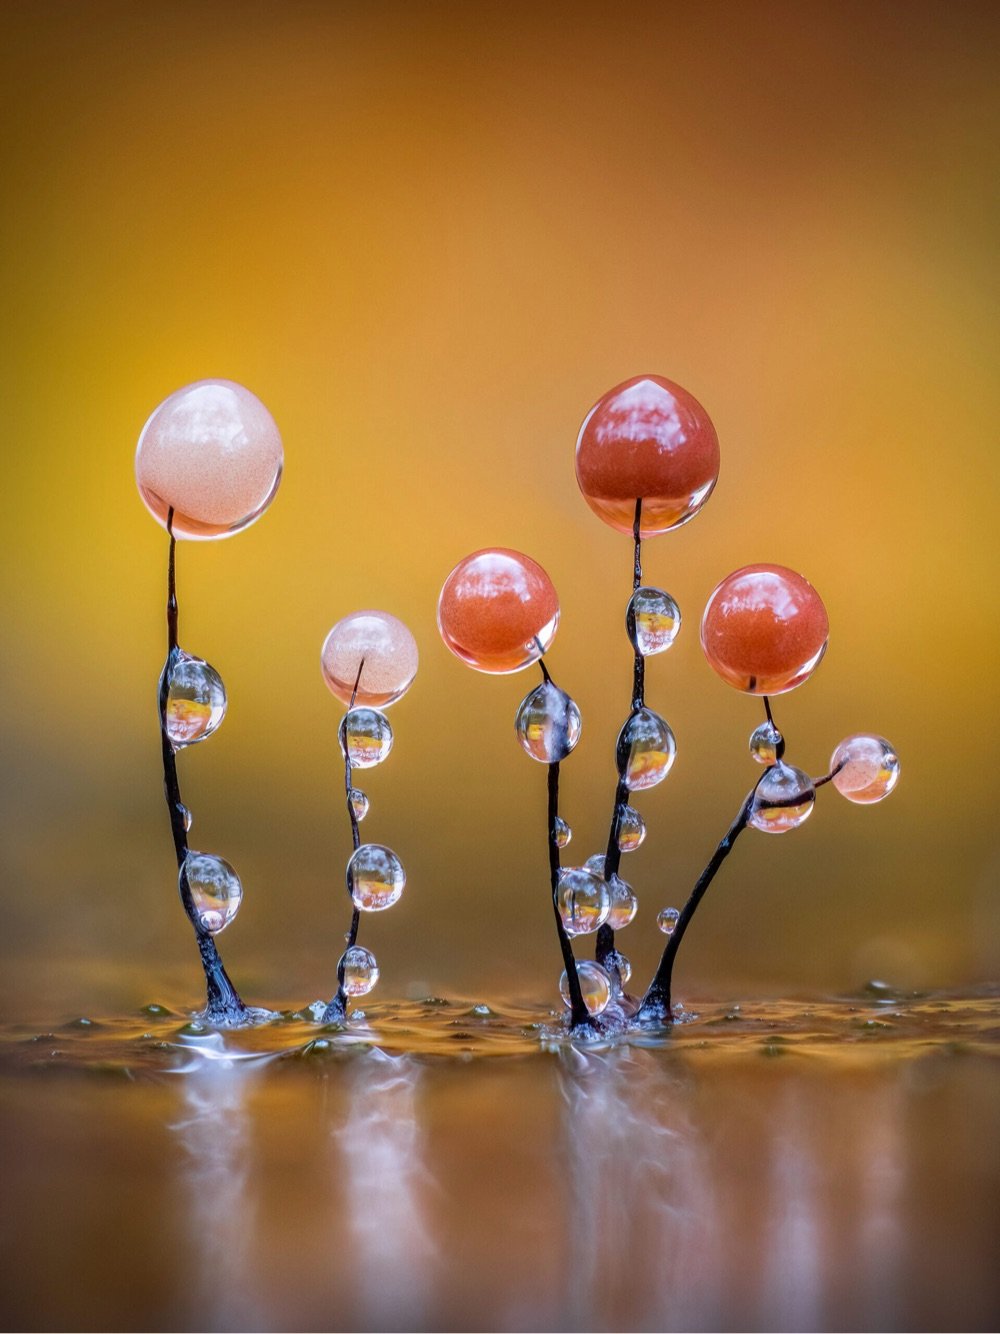 spikes of an orange slime mold covered in water droplets